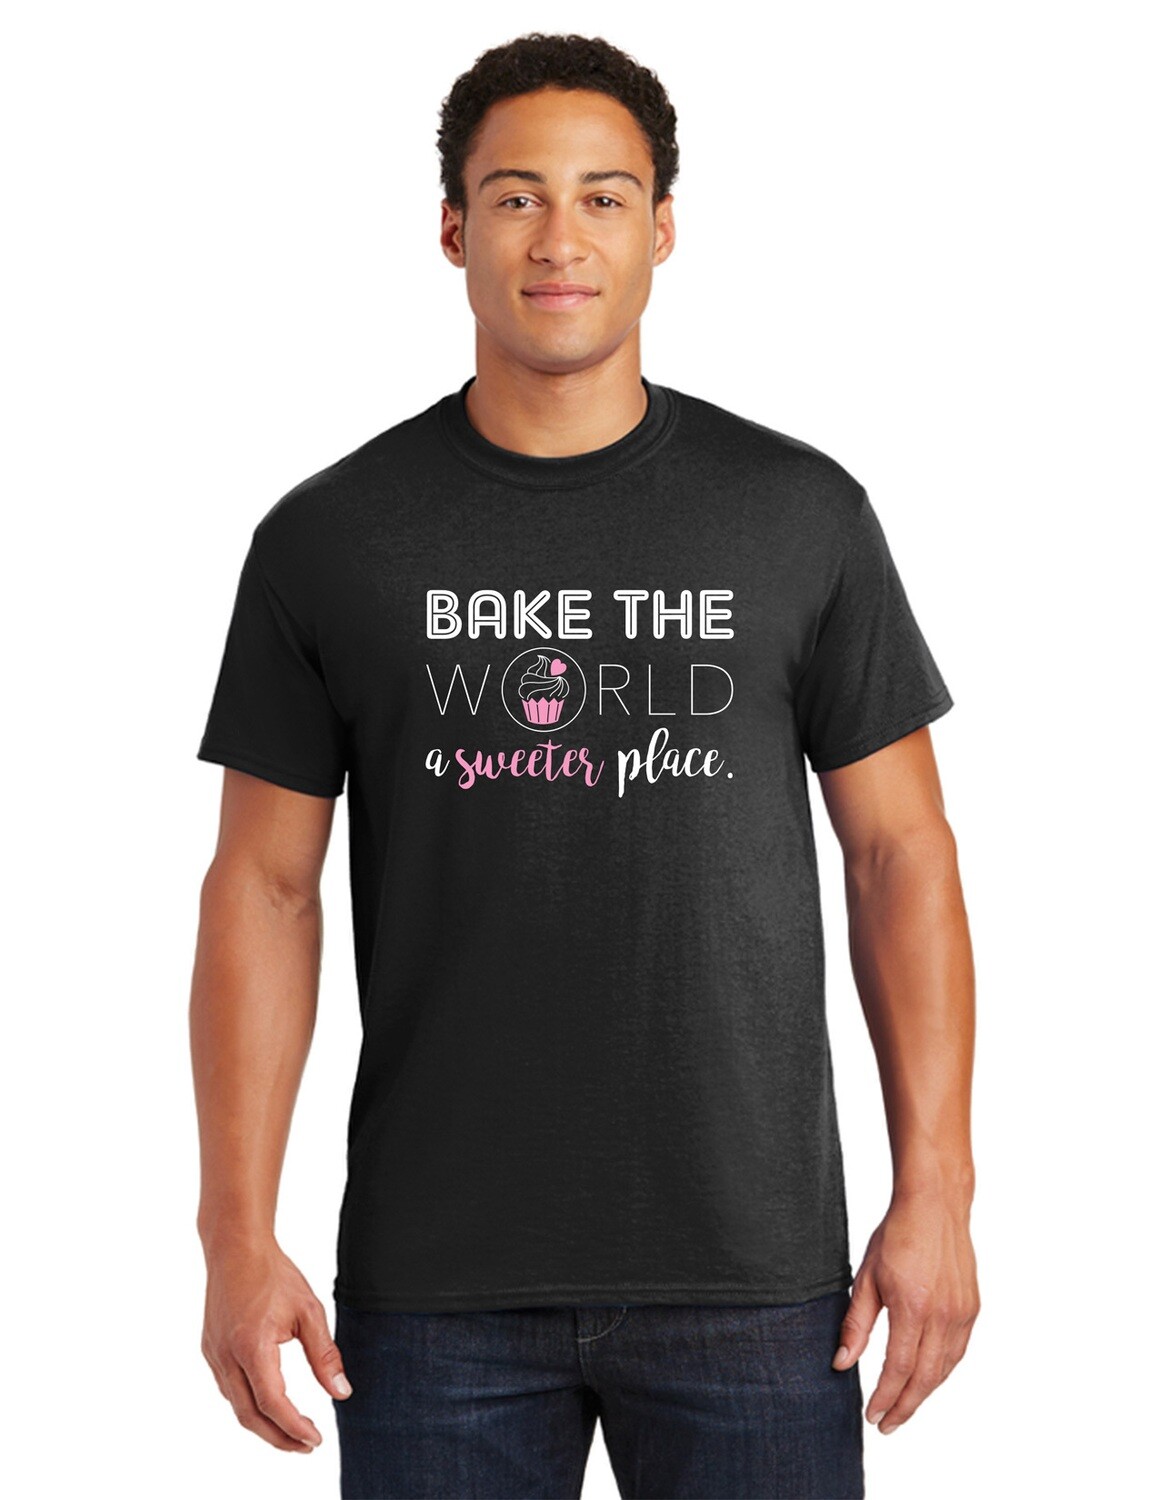 T-Shirt - Bake the World a Sweeter Place